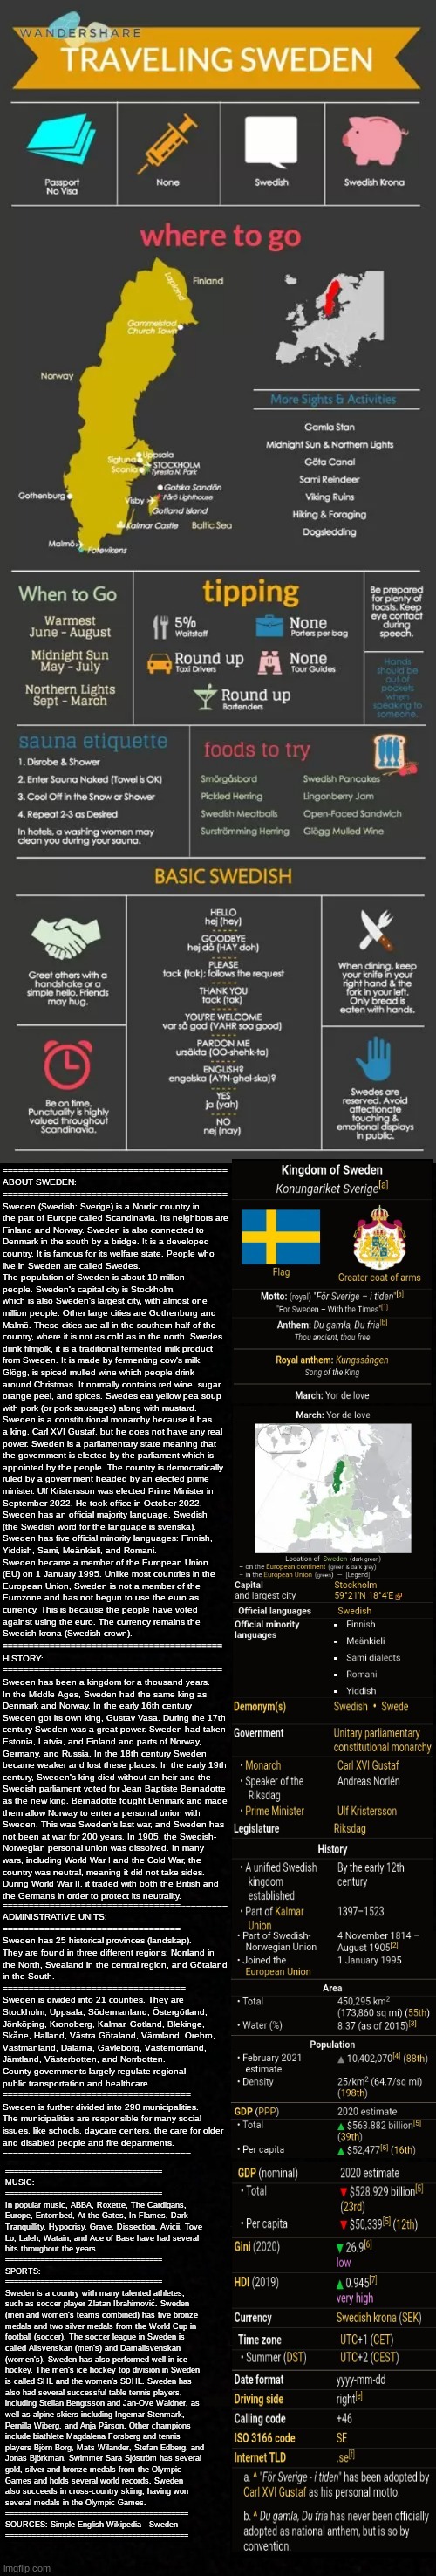 TRAVELLING SWEDEN: A Travel-Guide Infographic (By SimoTheFinlandized - 2022 CE) | image tagged in simothefinlandized,sweden,travel guide,infographic | made w/ Imgflip meme maker